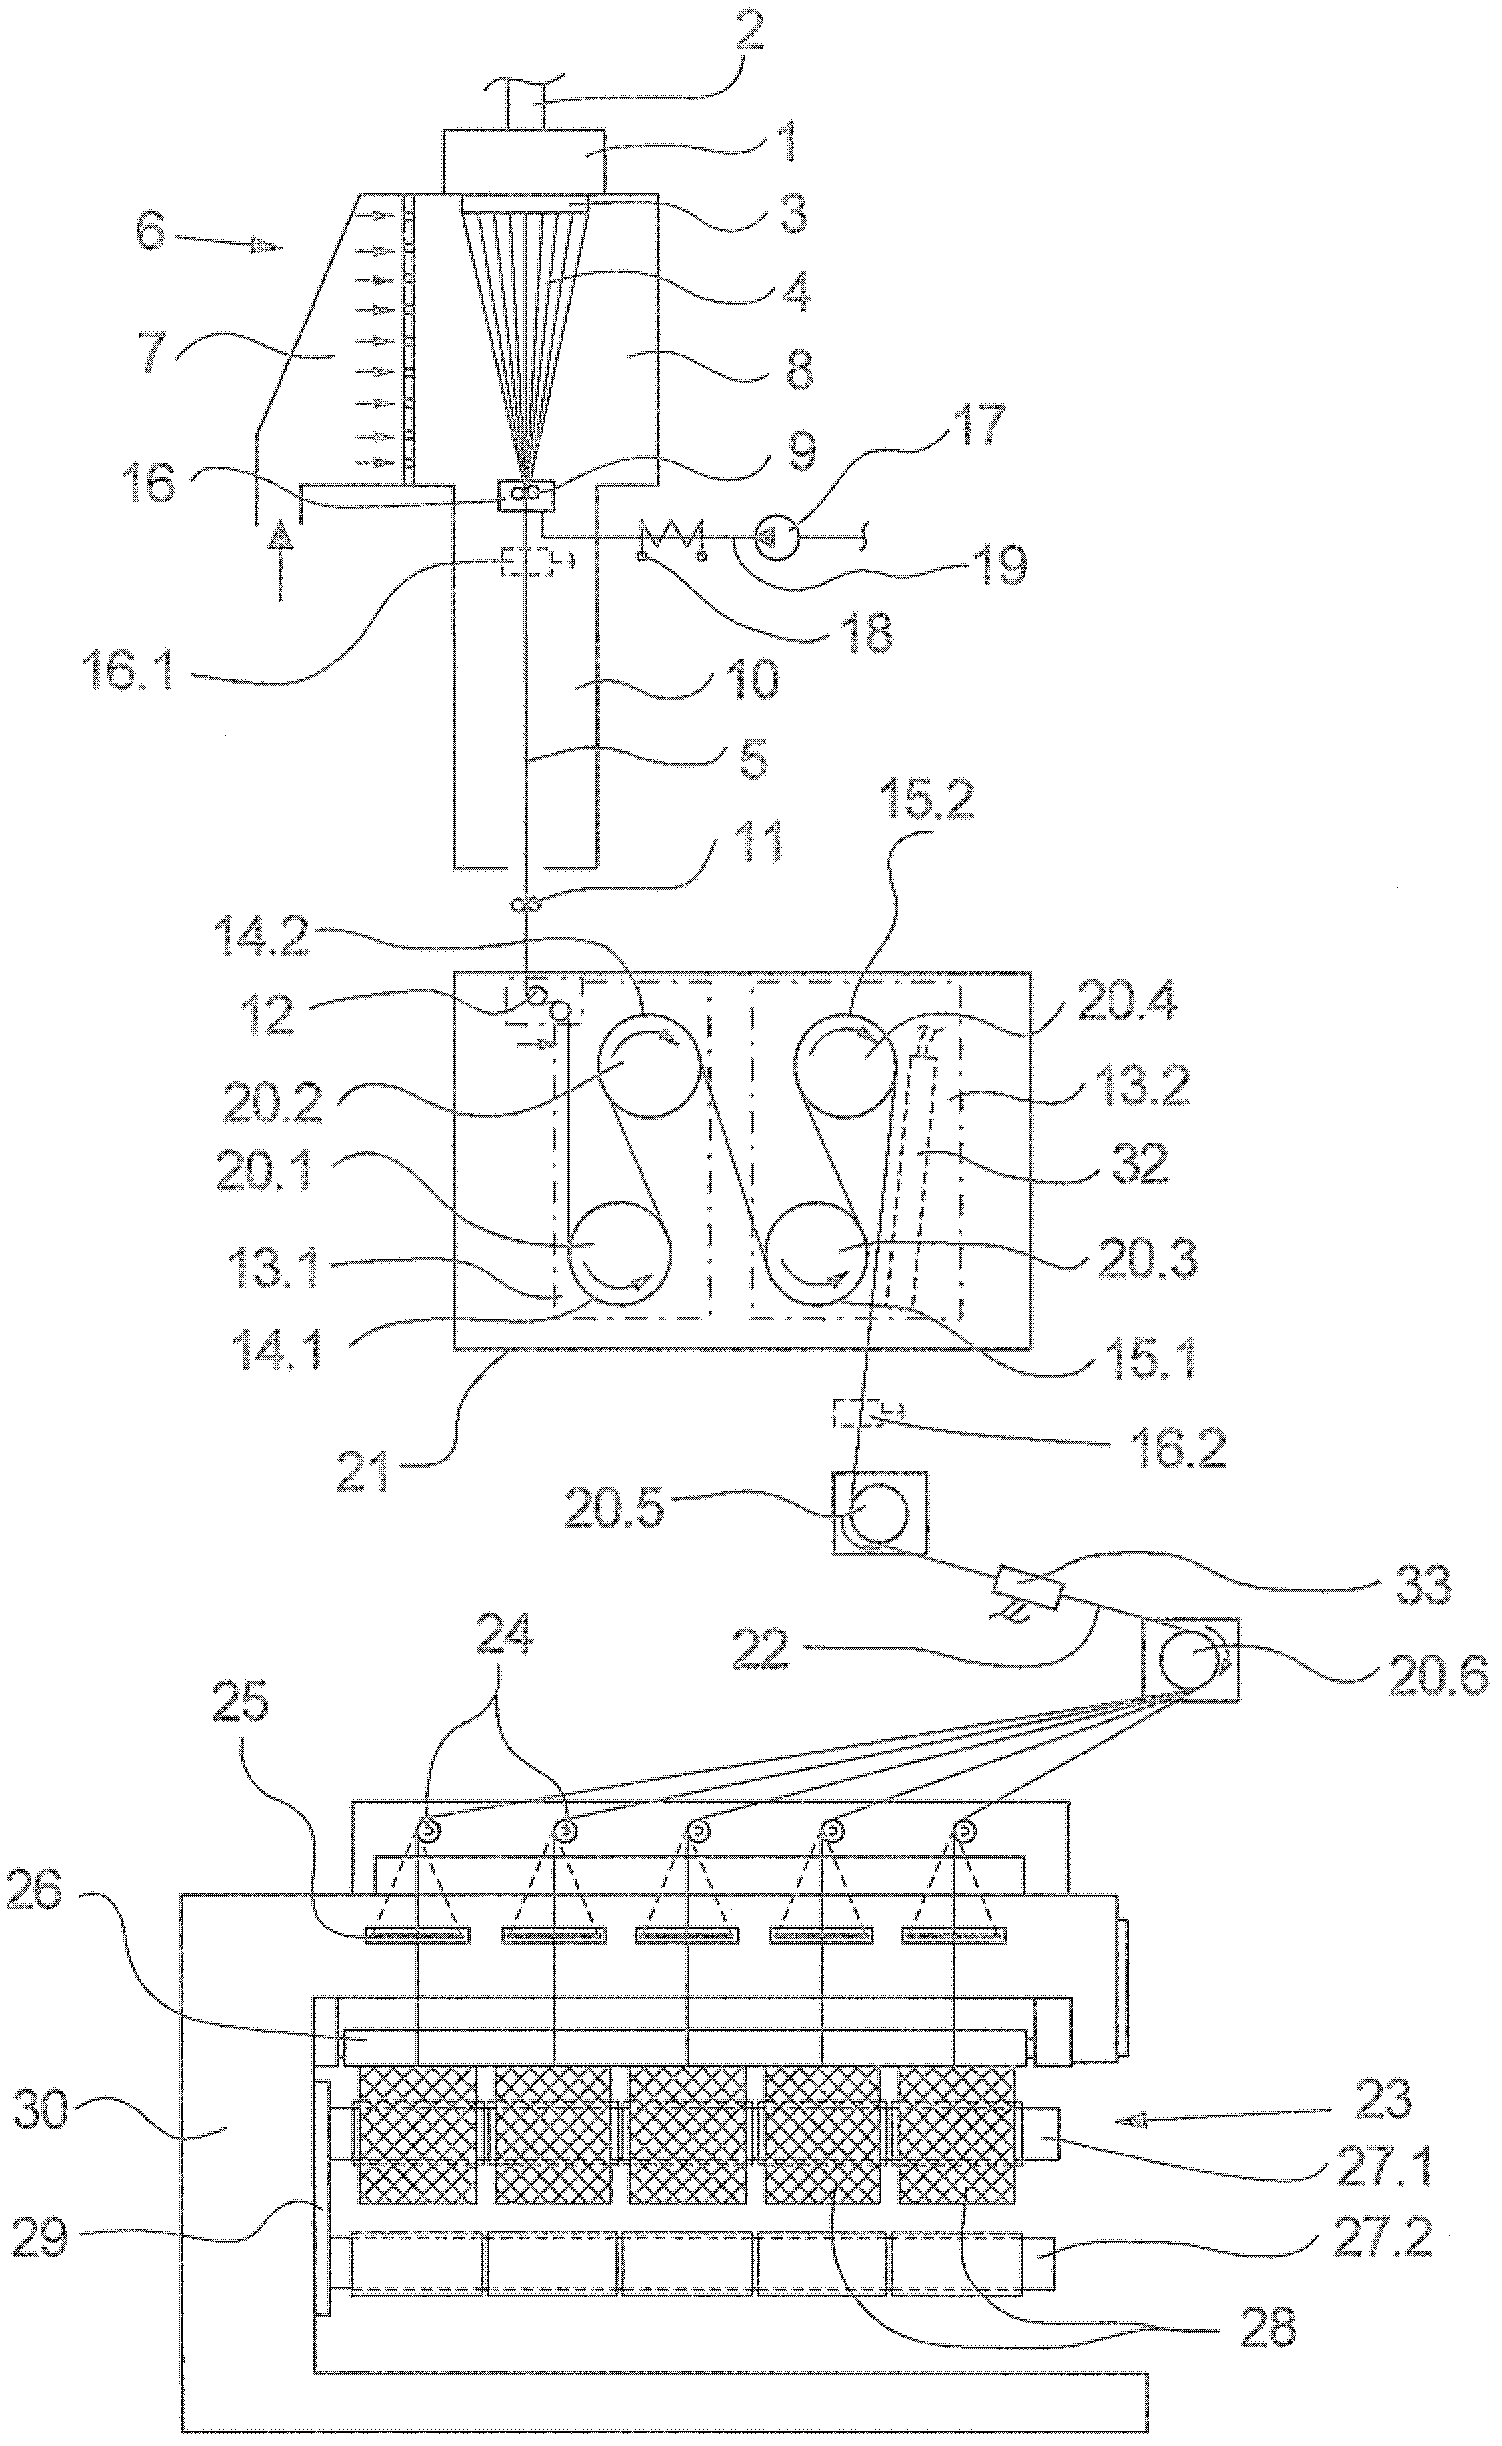 Method for melt-spinning, drawing, and winding a multifilament thread and a device for performing the method